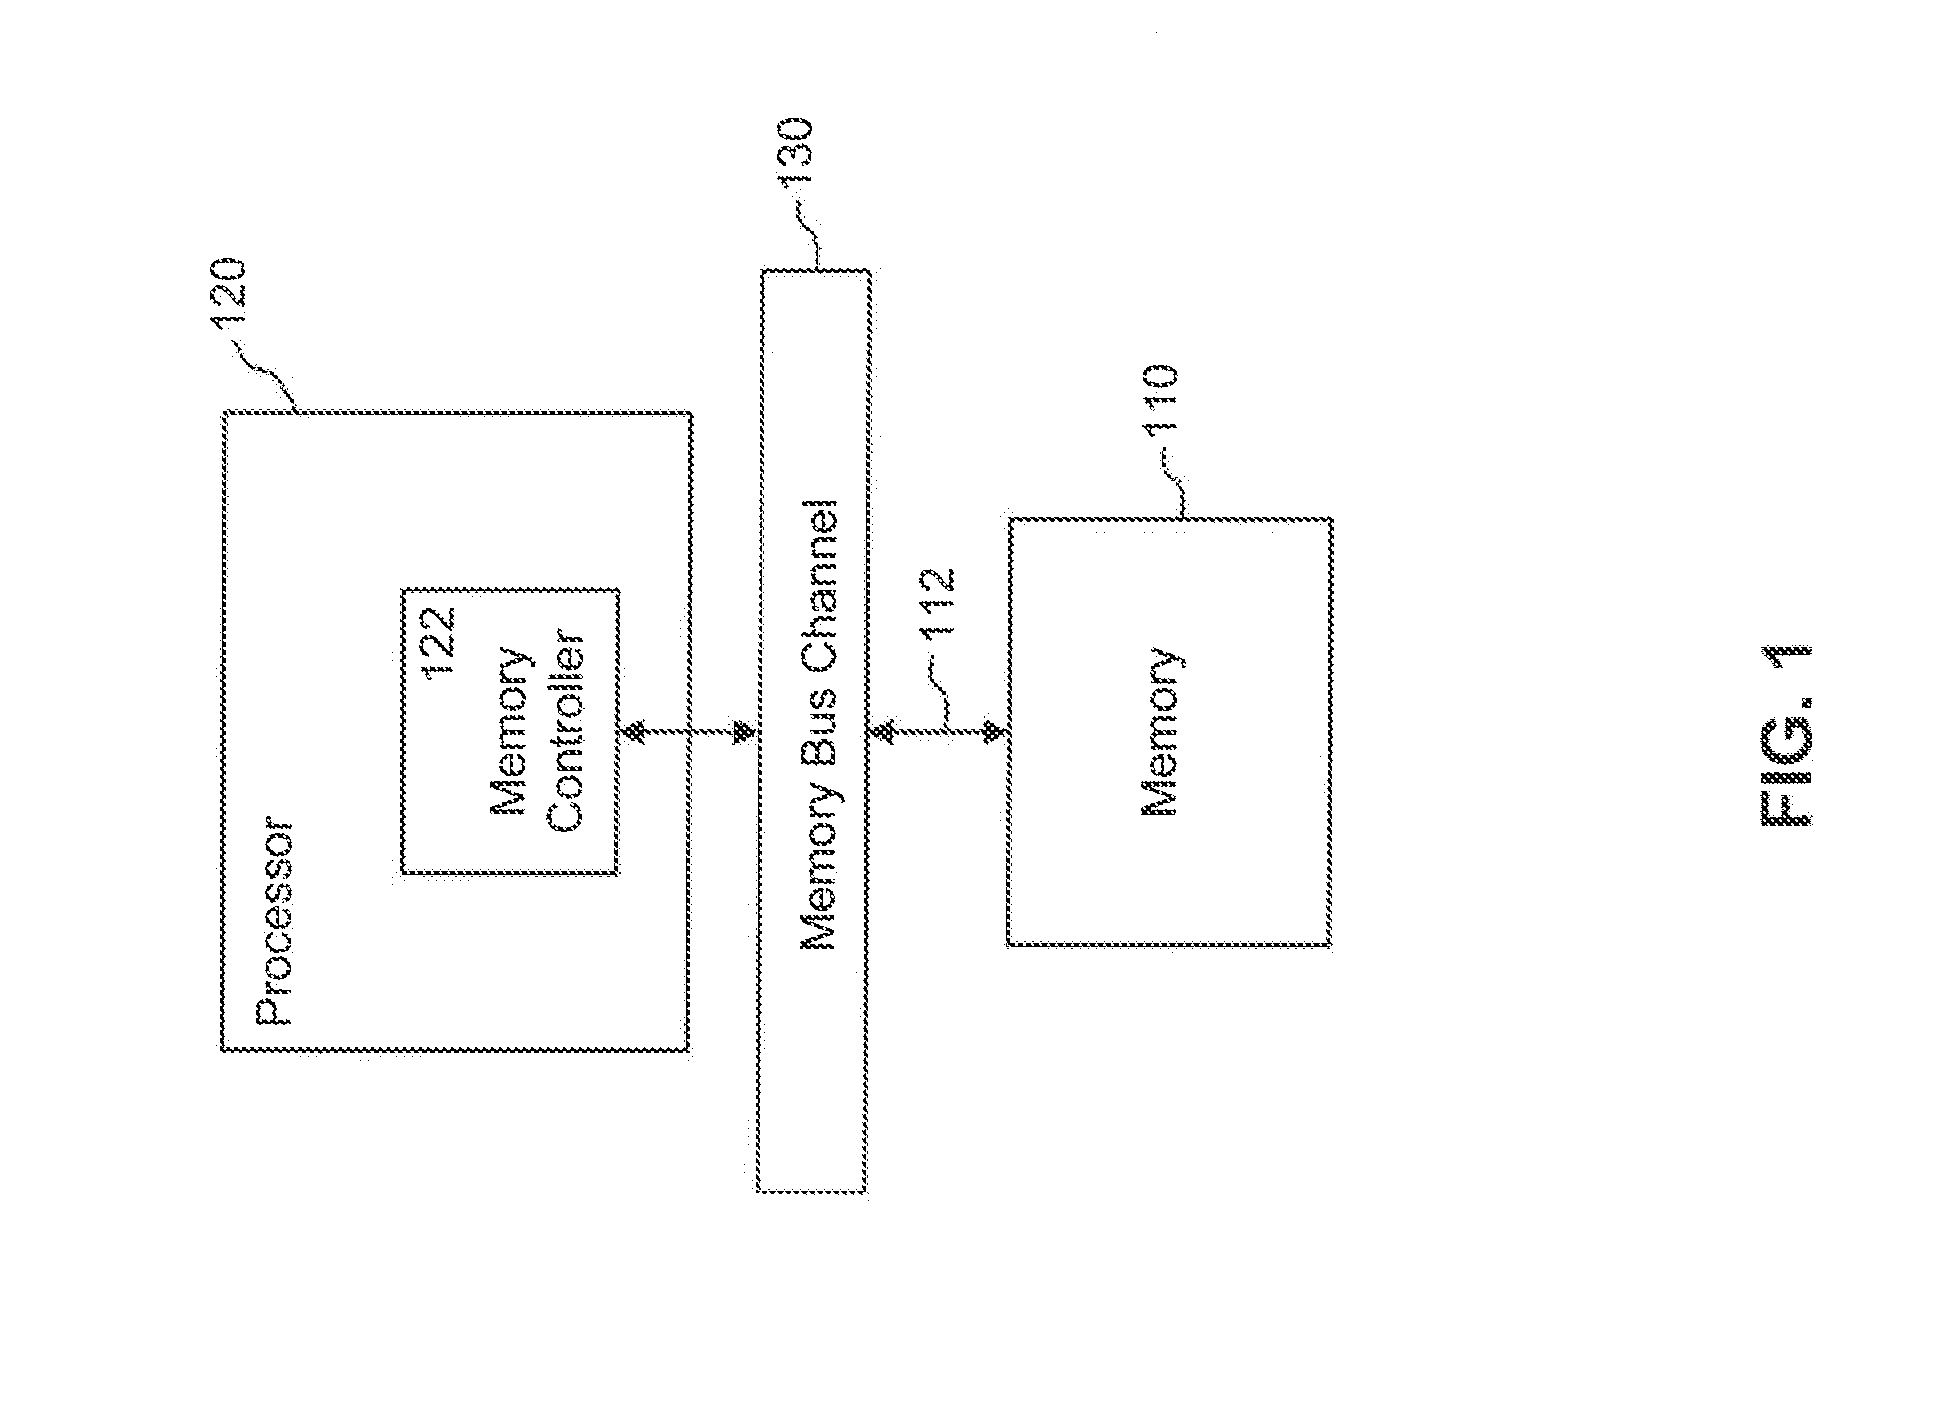 Memory Interface Supporting Both ECC and Per-Byte Data Masking